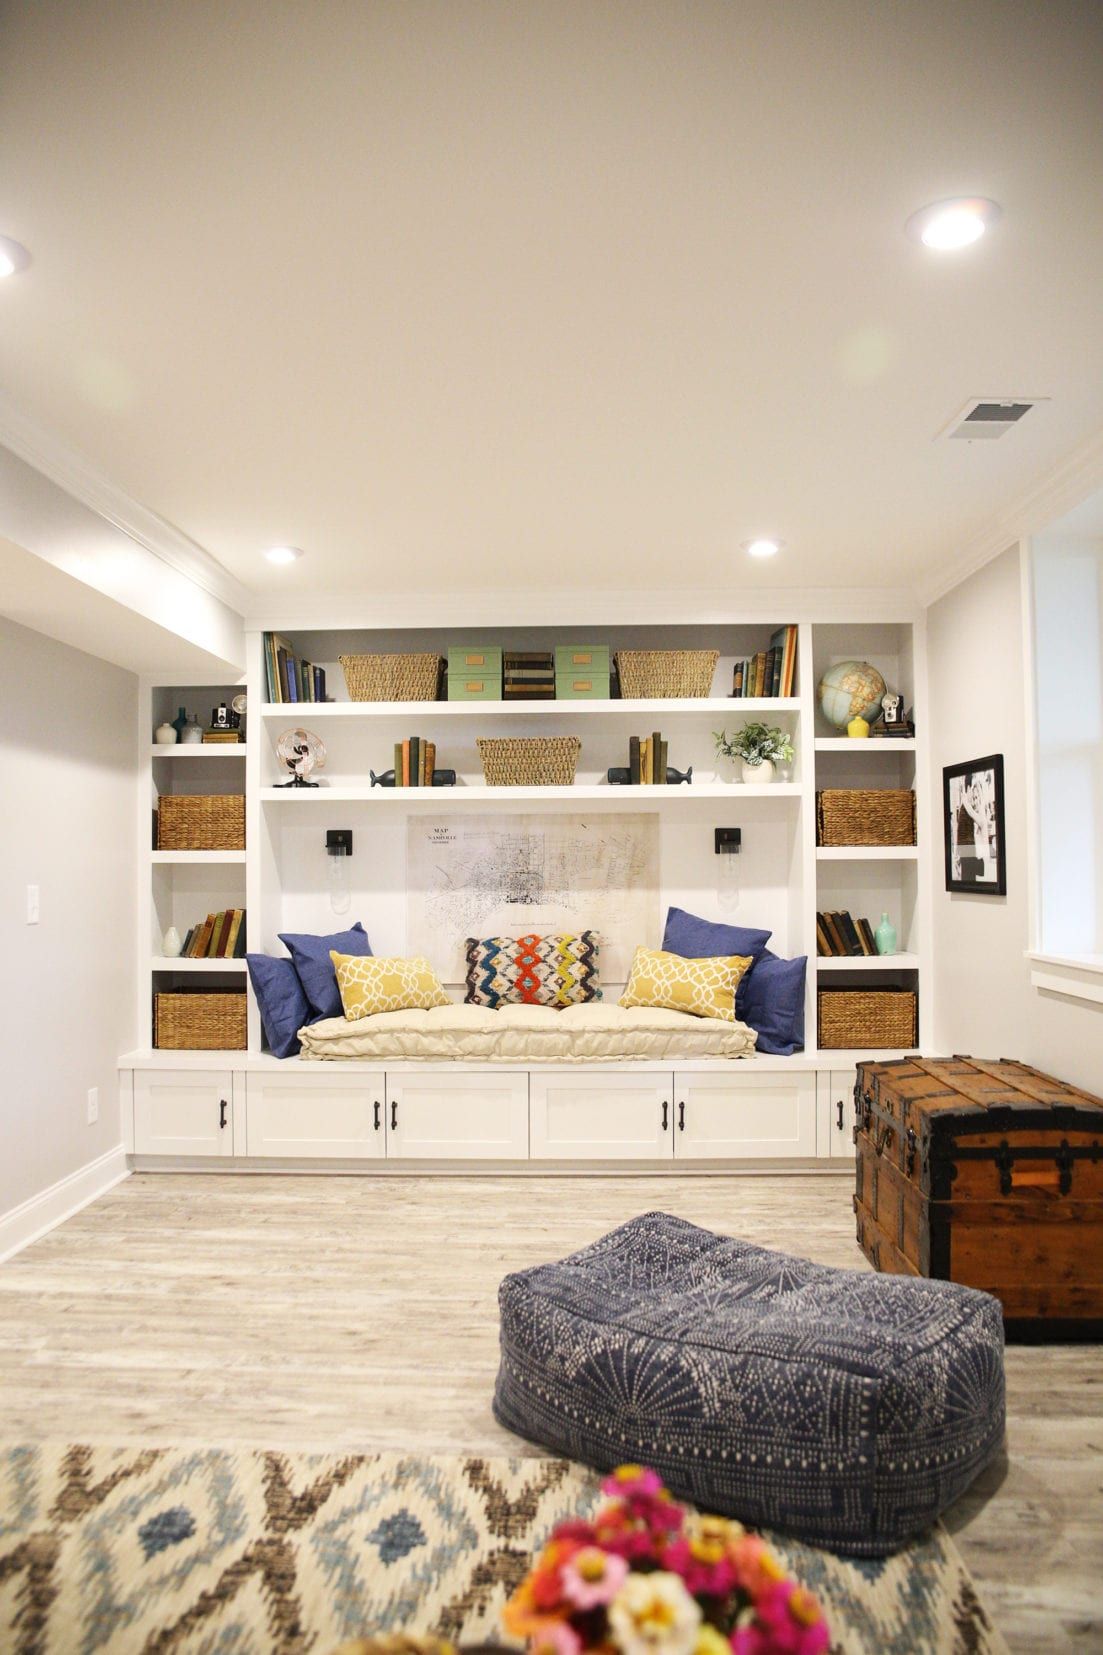 18 Creative Finished Basement Ideas and Designs